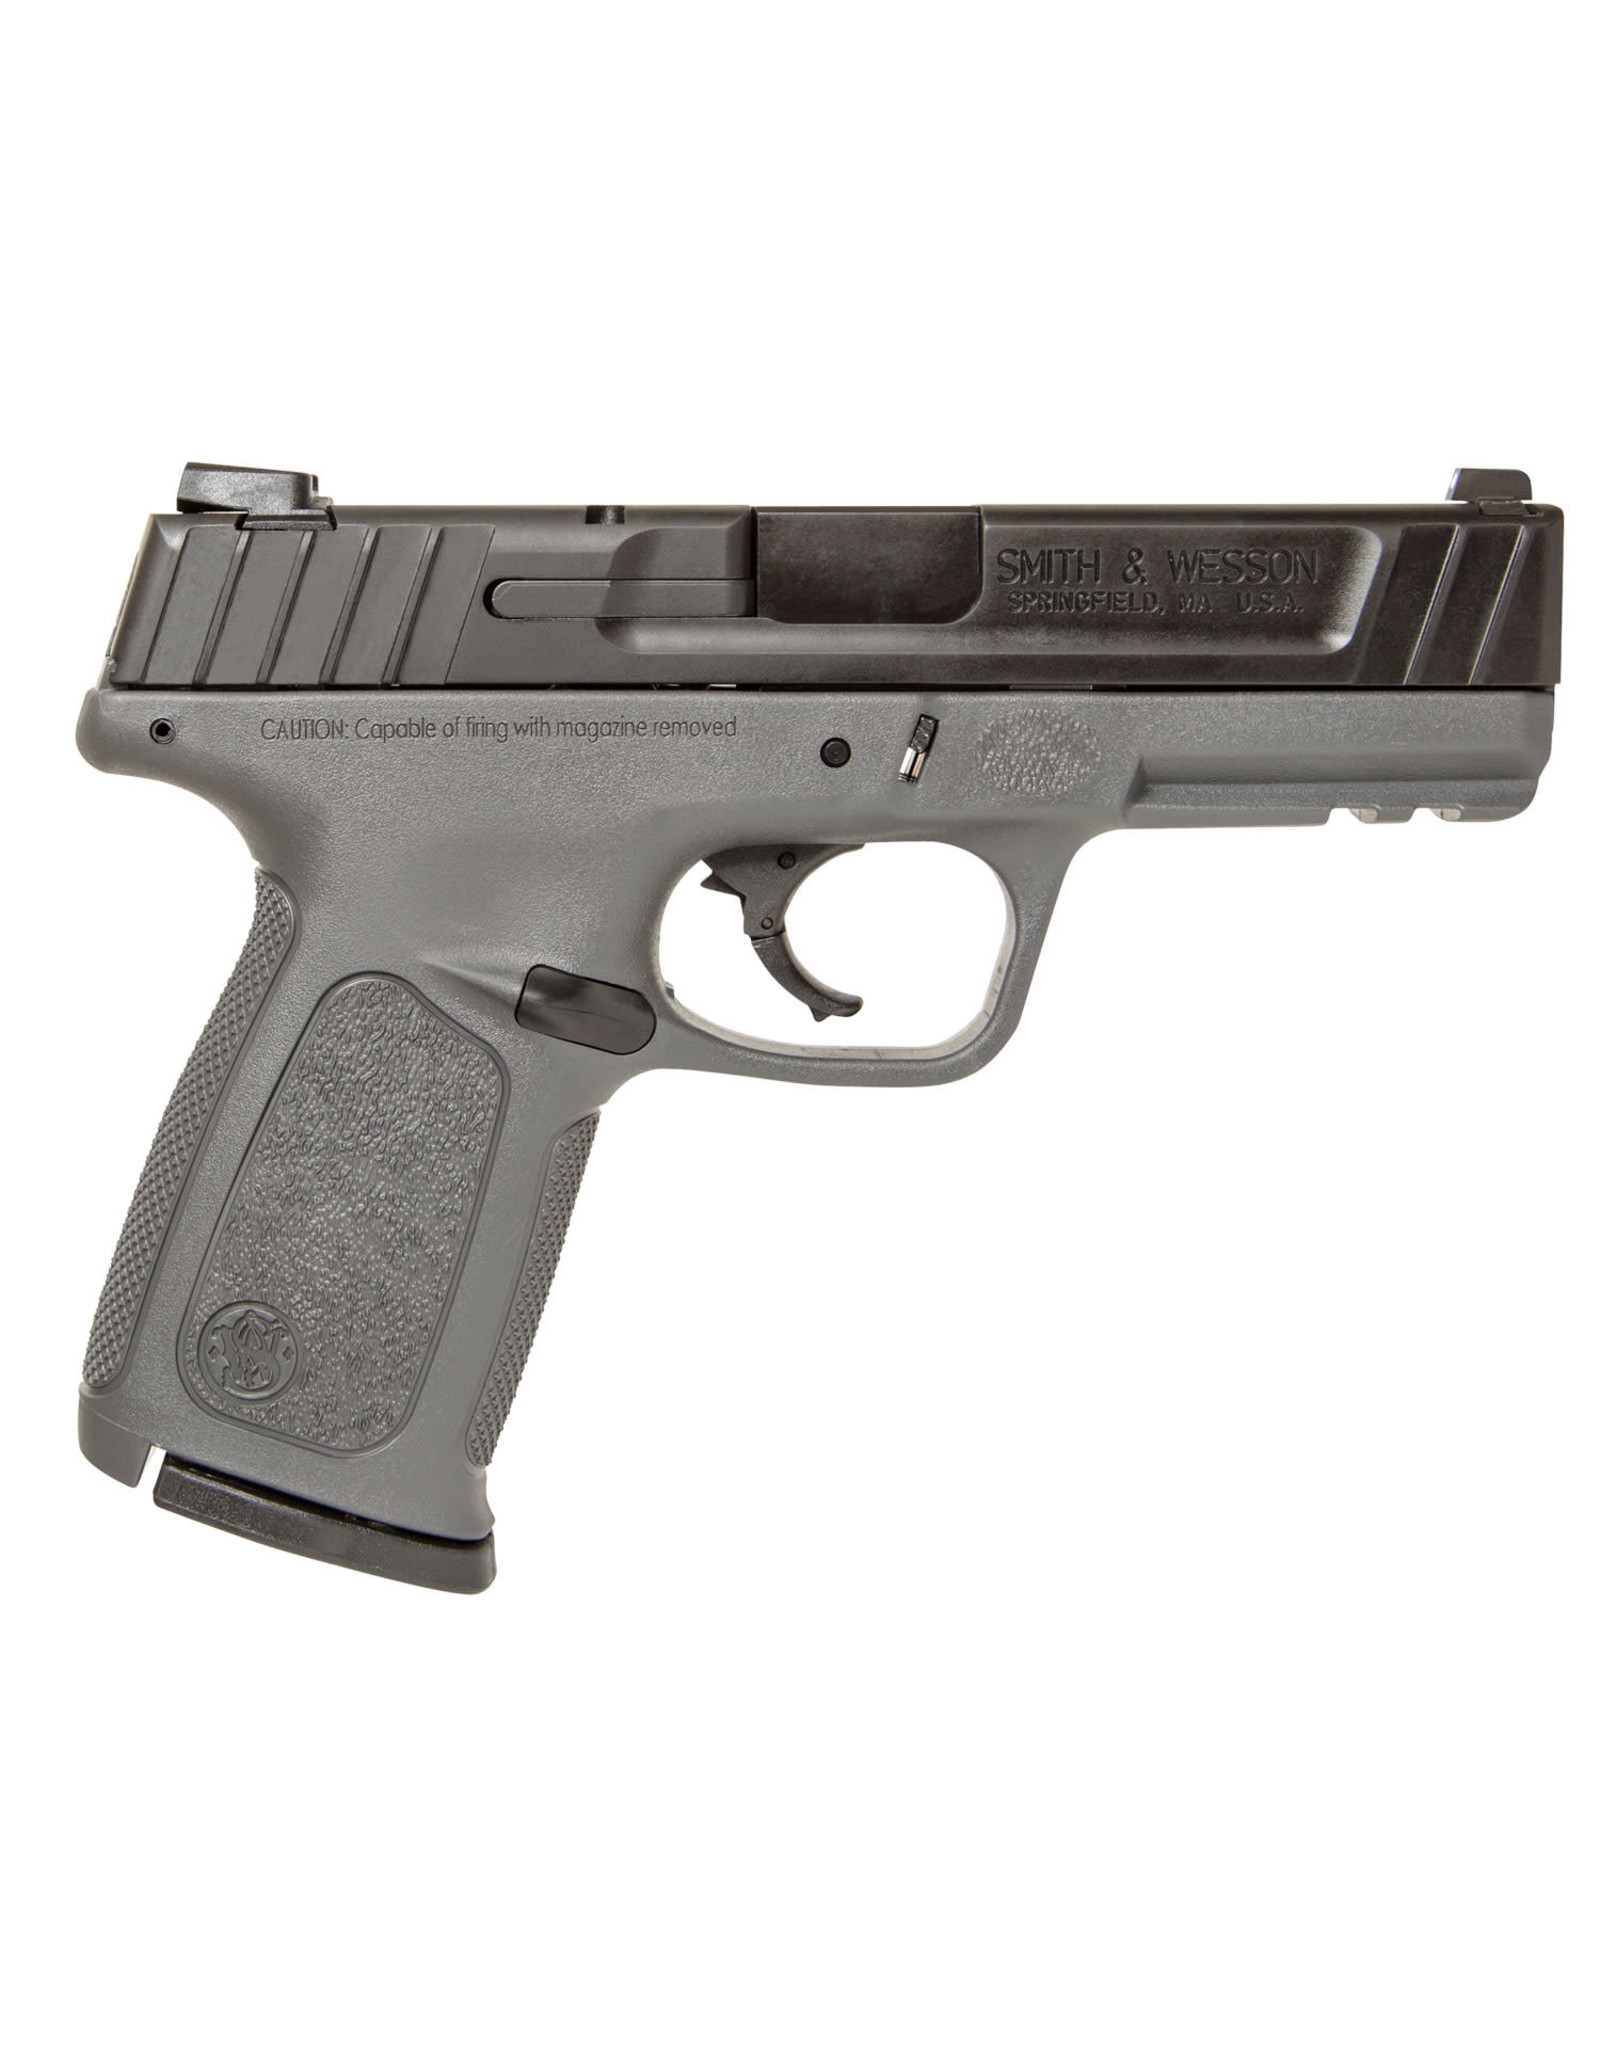 Smith & Wesson SD9 Gray 9mm 16 Rnd.